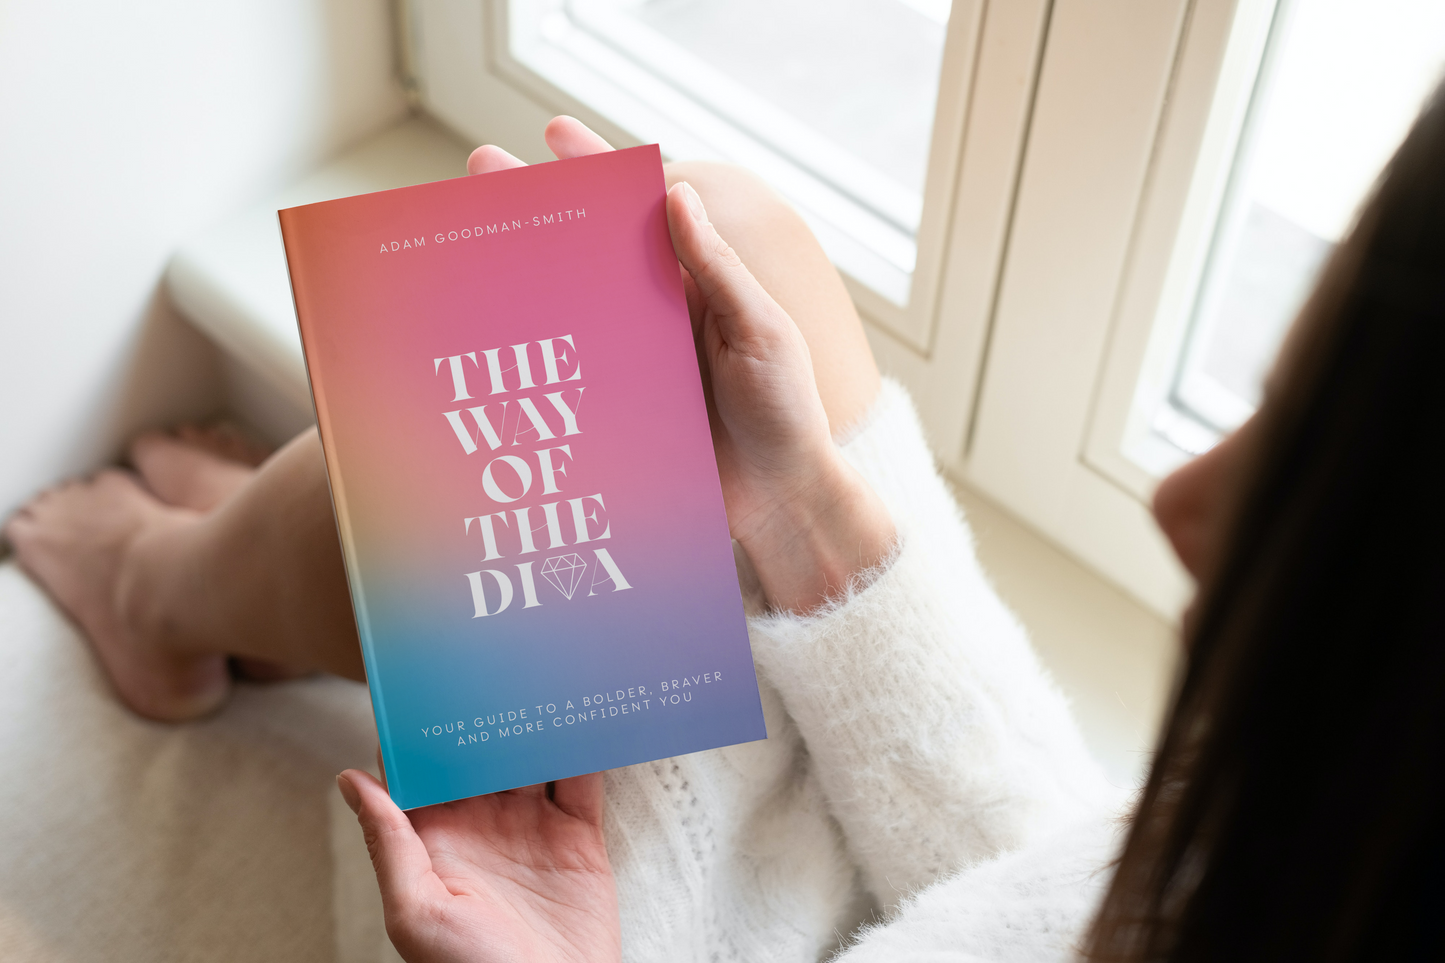 The Way of The Diva: Your Guide to a Bolder, Braver and More Confident You